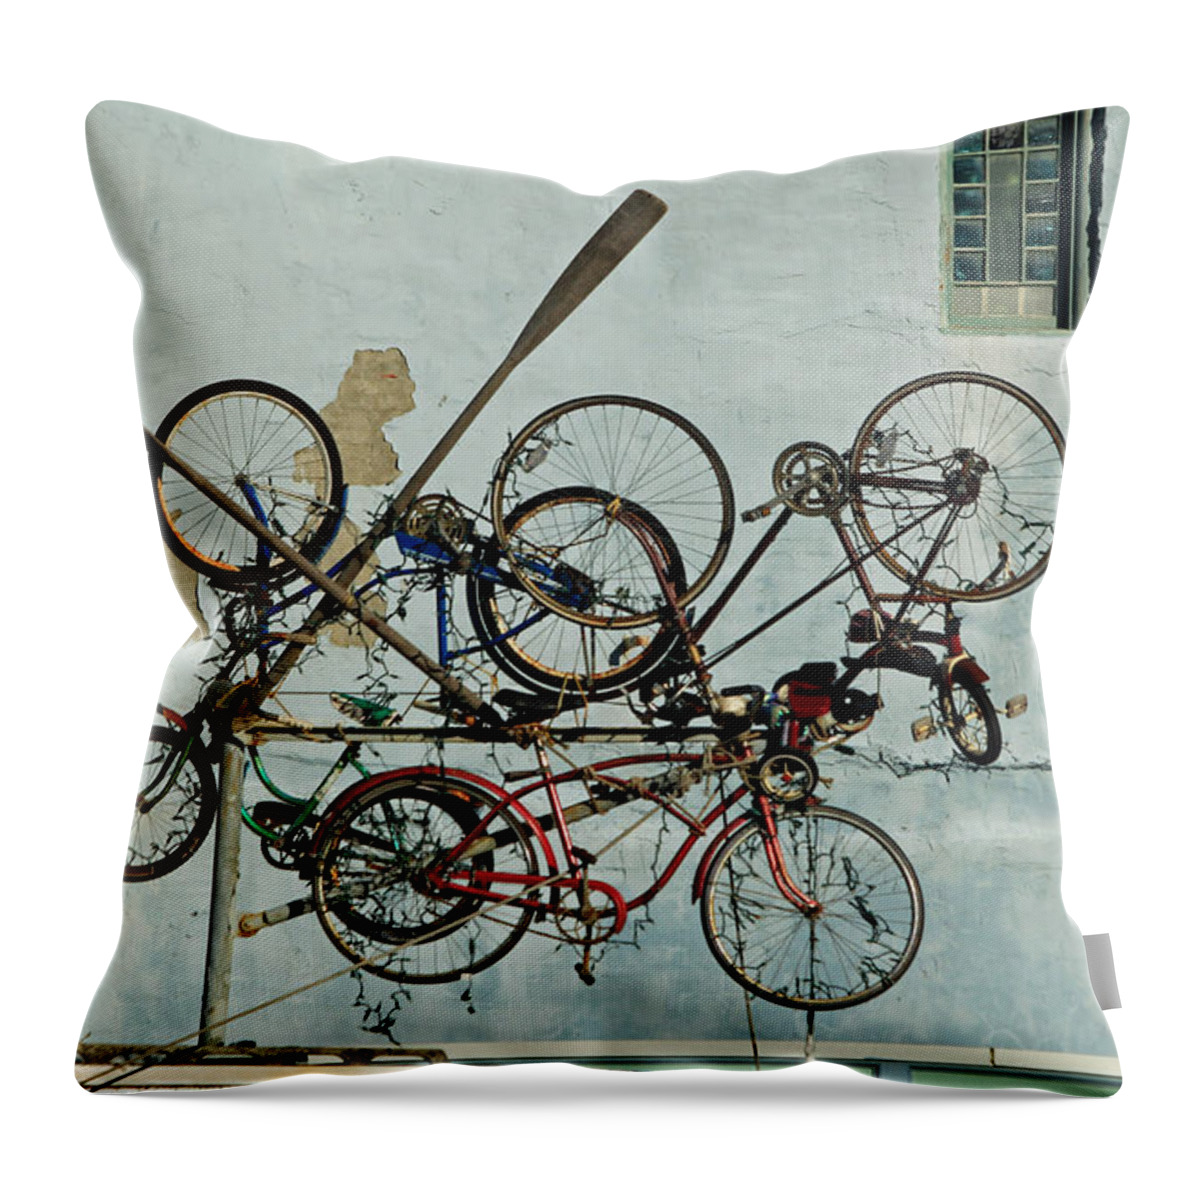 Abstract Photography Throw Pillow featuring the photograph Wheels Up by E Faithe Lester